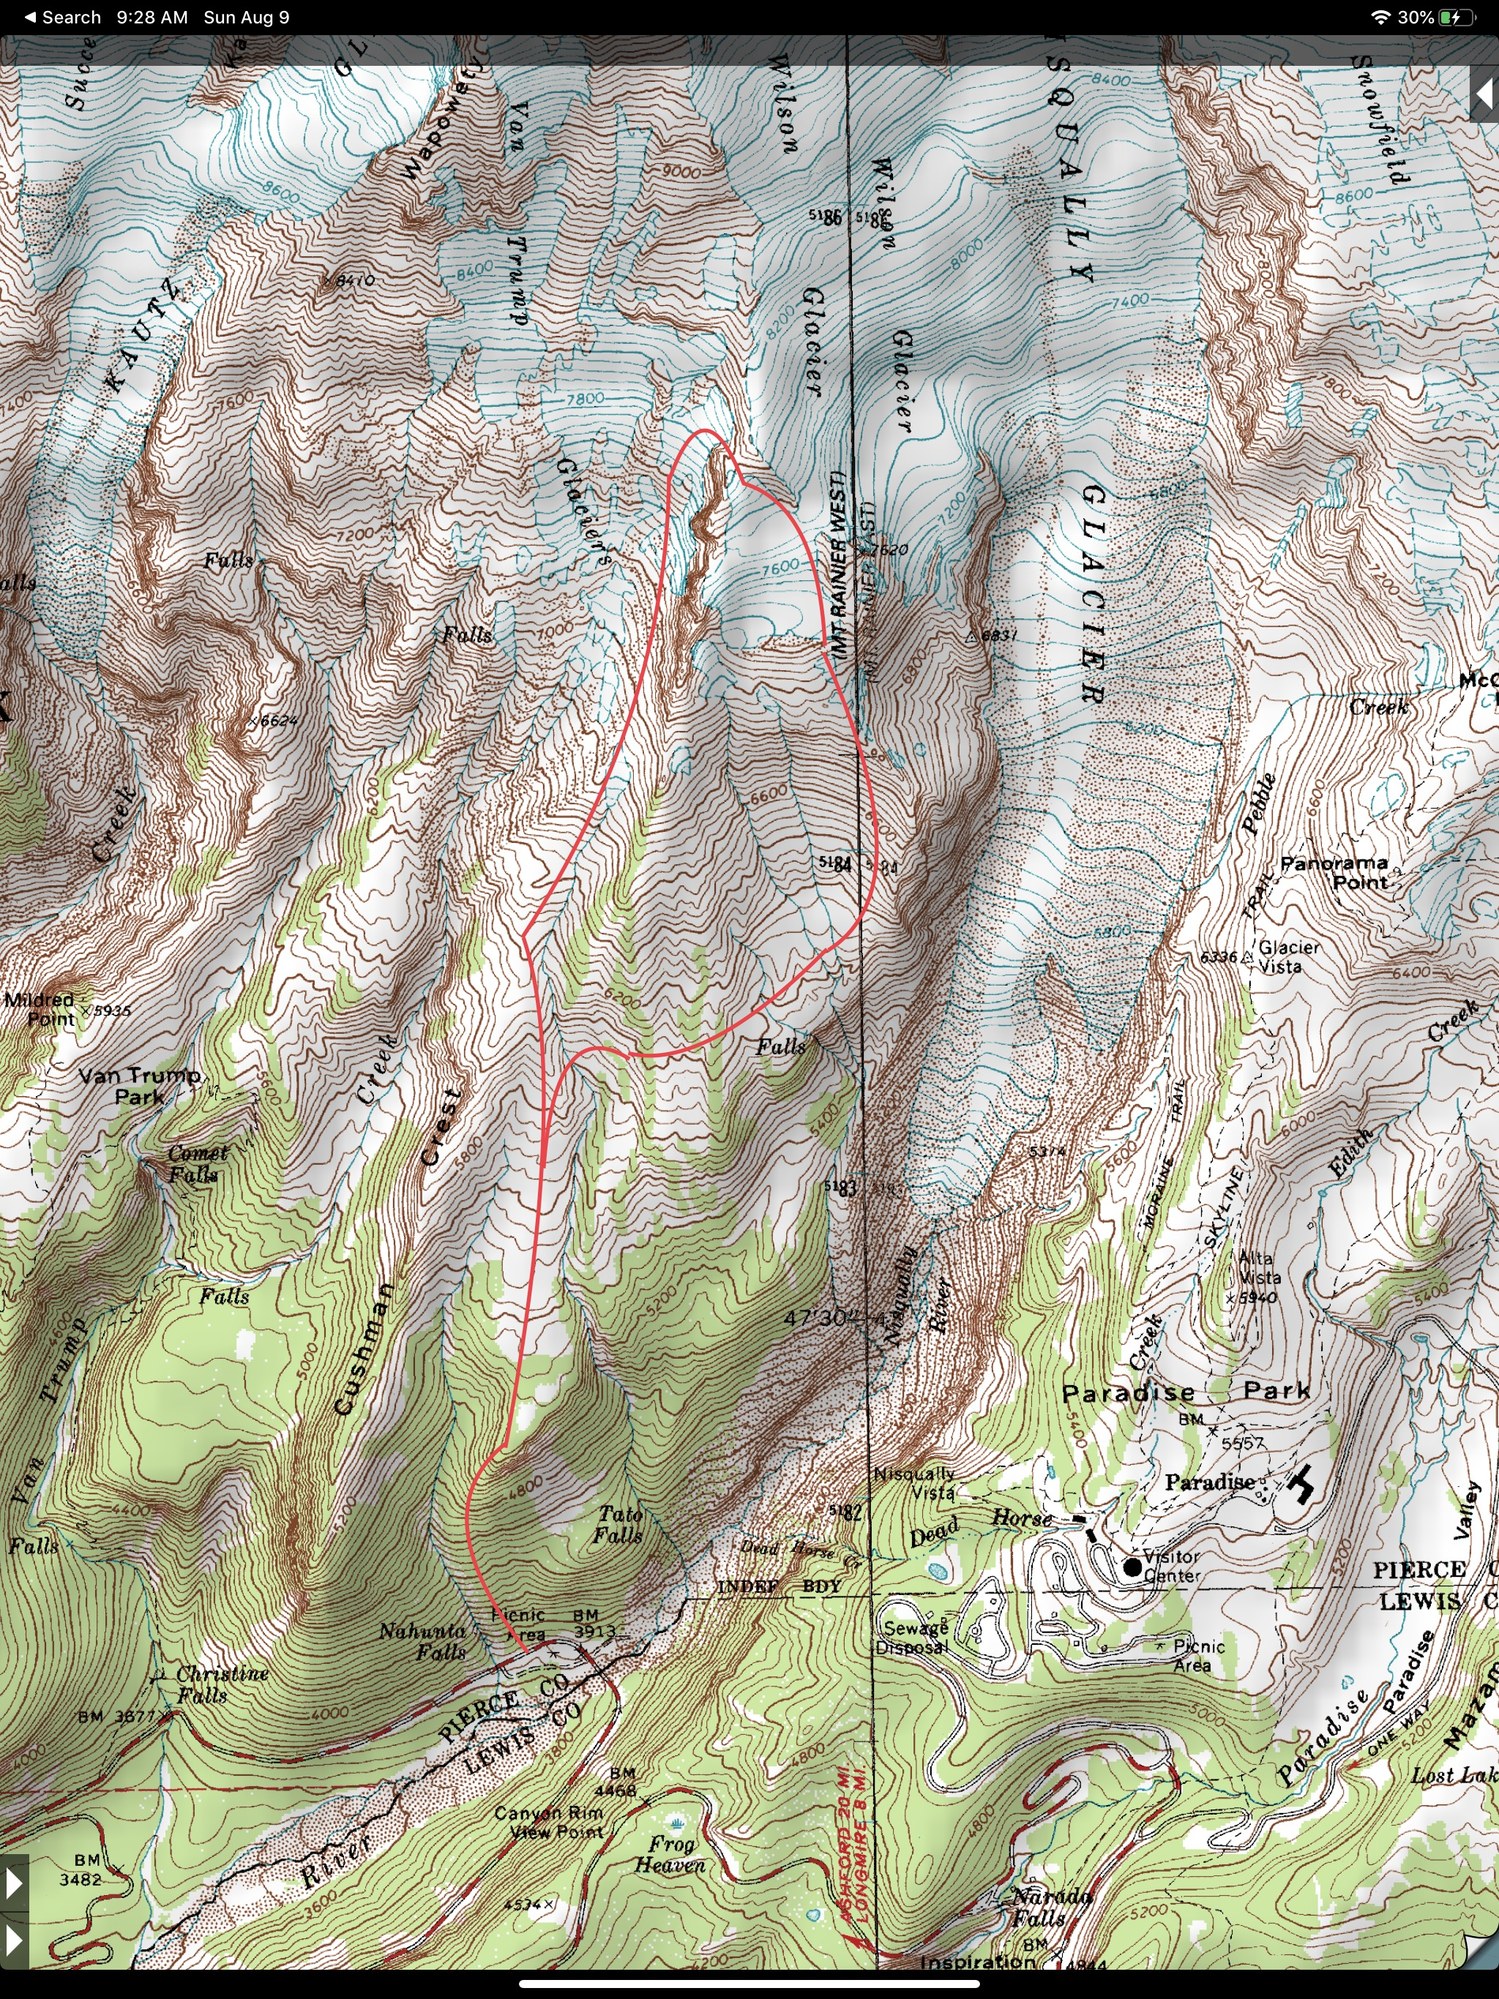 A topo map with the Cushman Crest—Wilson Cleaver Traverse route create by Dave Morgan Aug 2020.